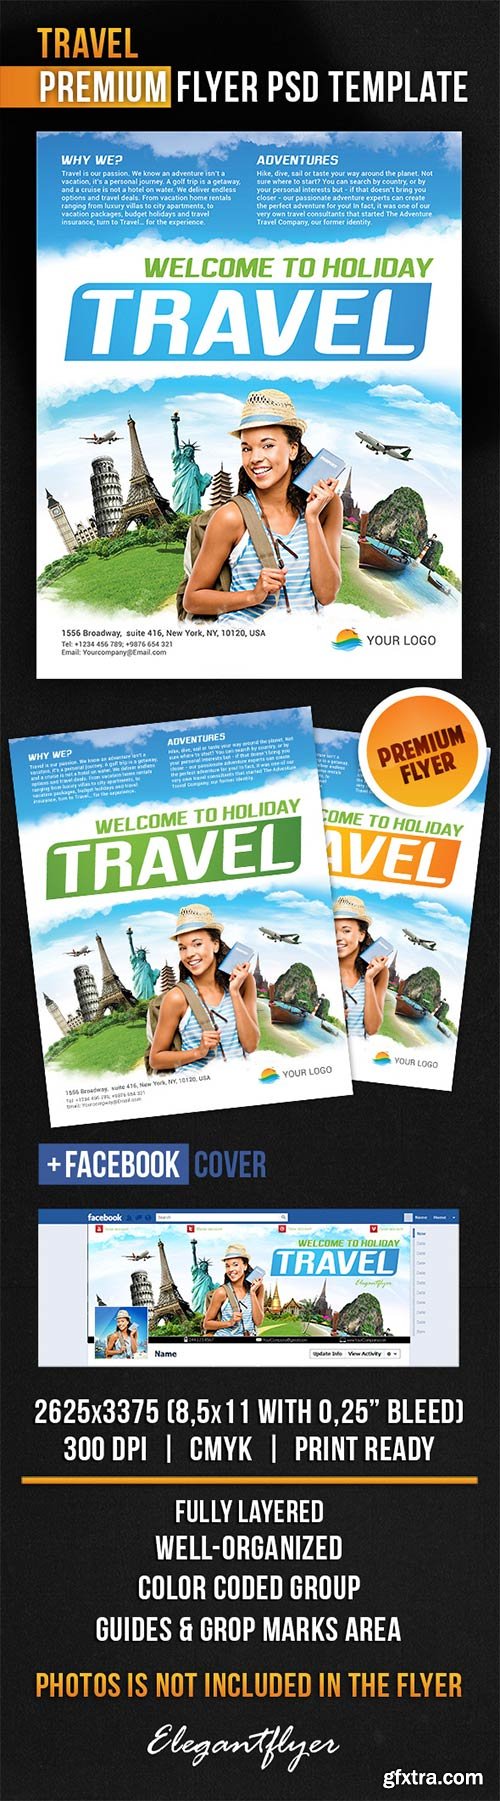 Travel Flyer PSD Template + Facebook Cover